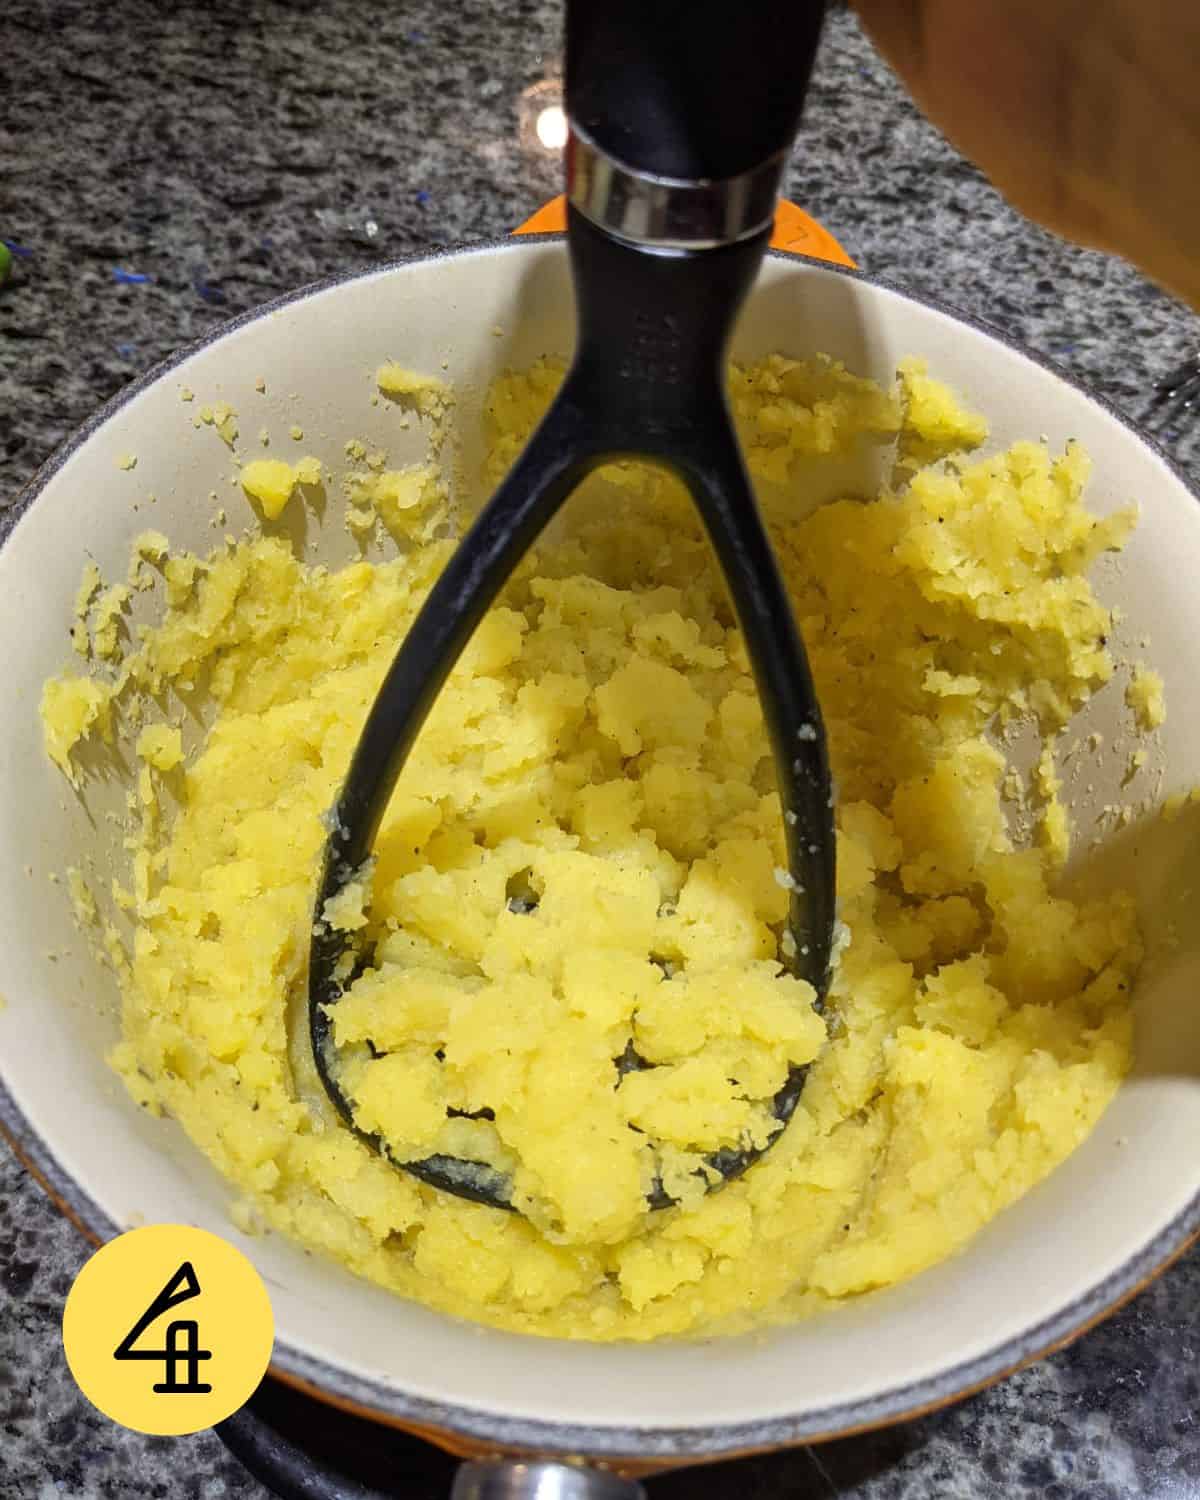 Swede being mashed with a potato masher in a pan.